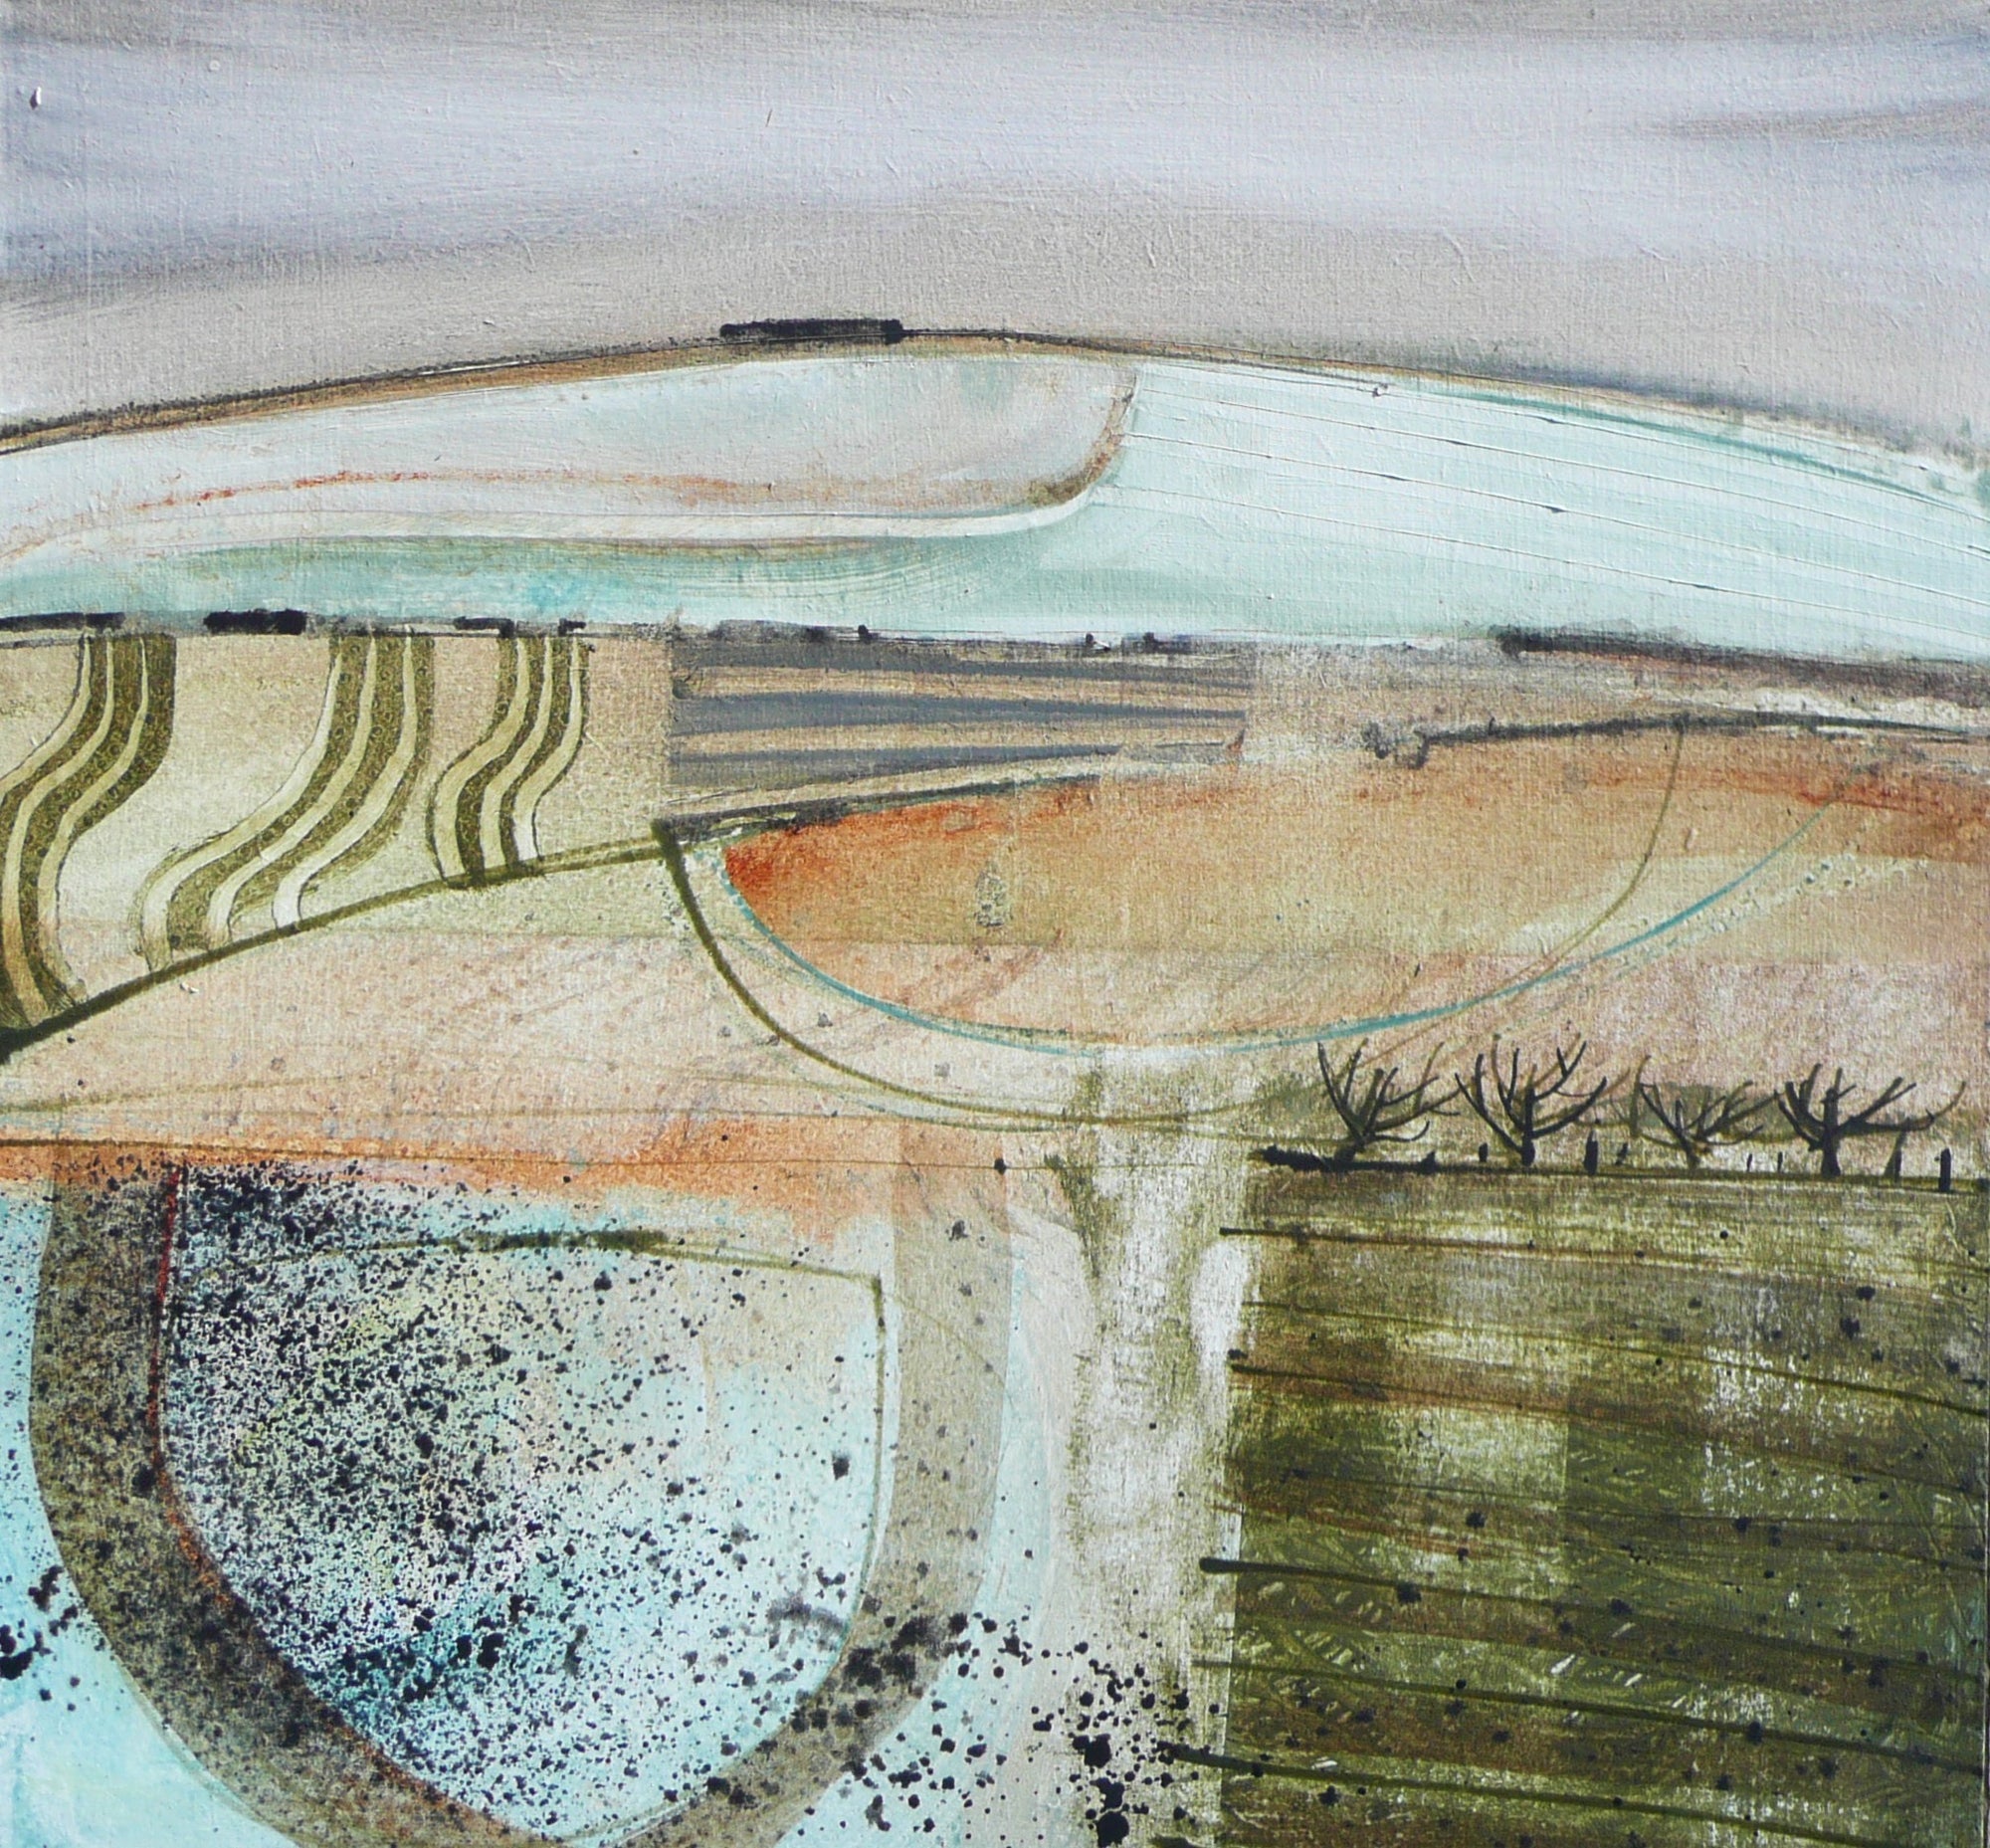 Ploughing the Land, oil on board, by Ruth Taylor, available at Padstow Gallery, Cornwall